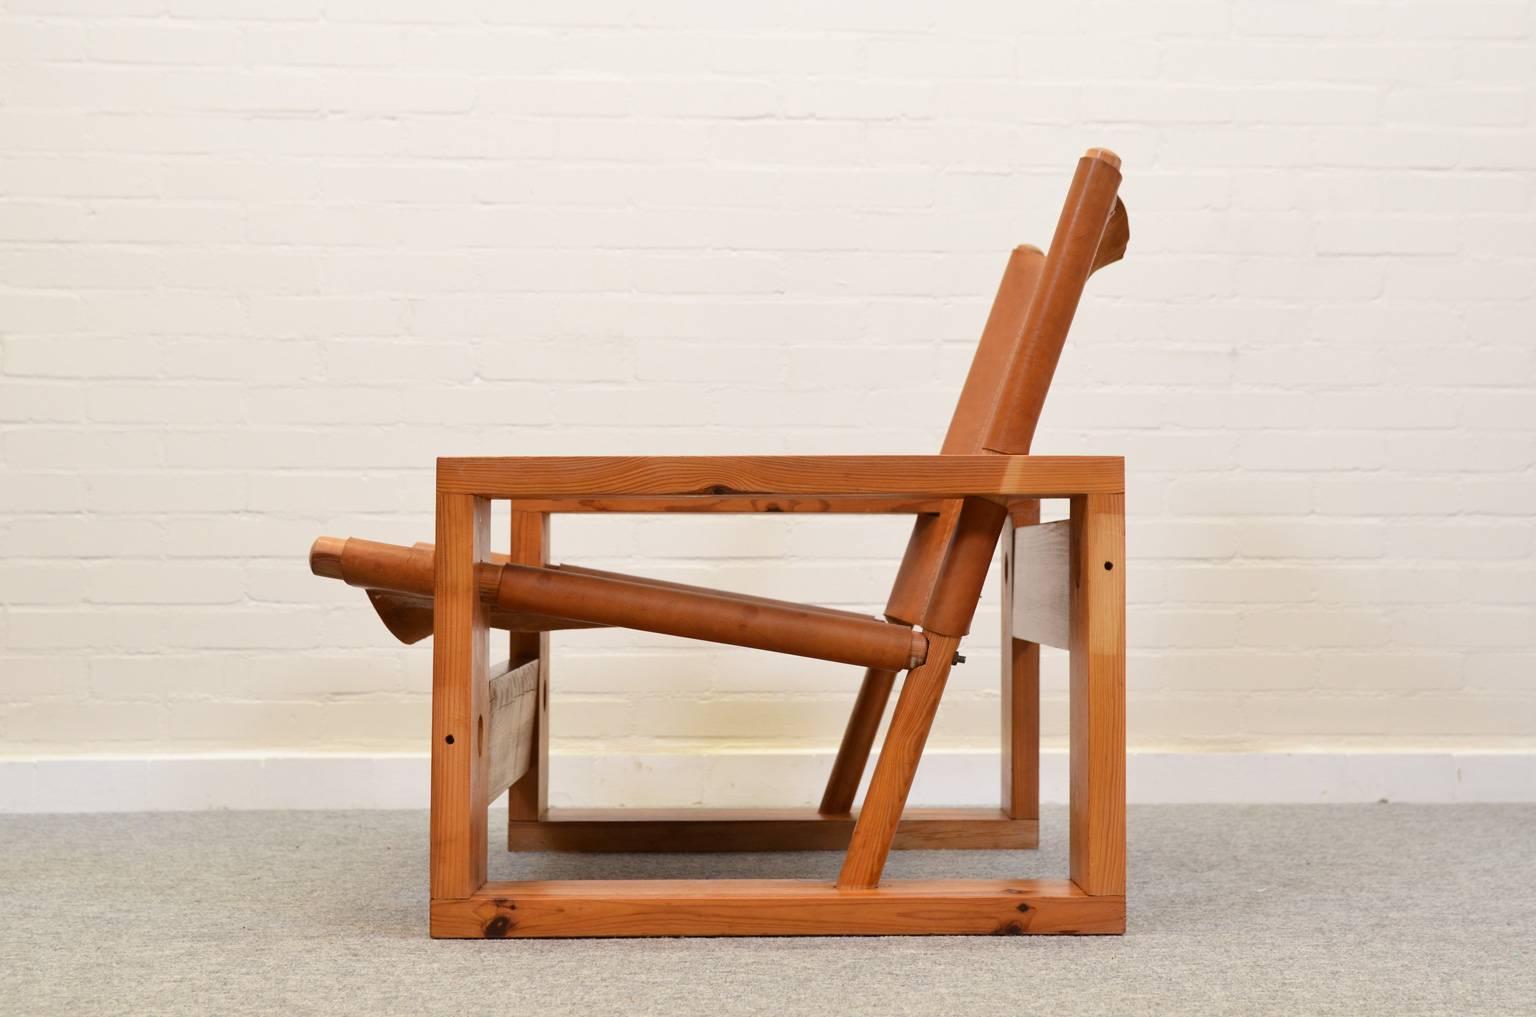 Very robust armchair made of pine wood. The seating and backrest are made of saddle leather and are suspended in an ingenious fashion in the frame.